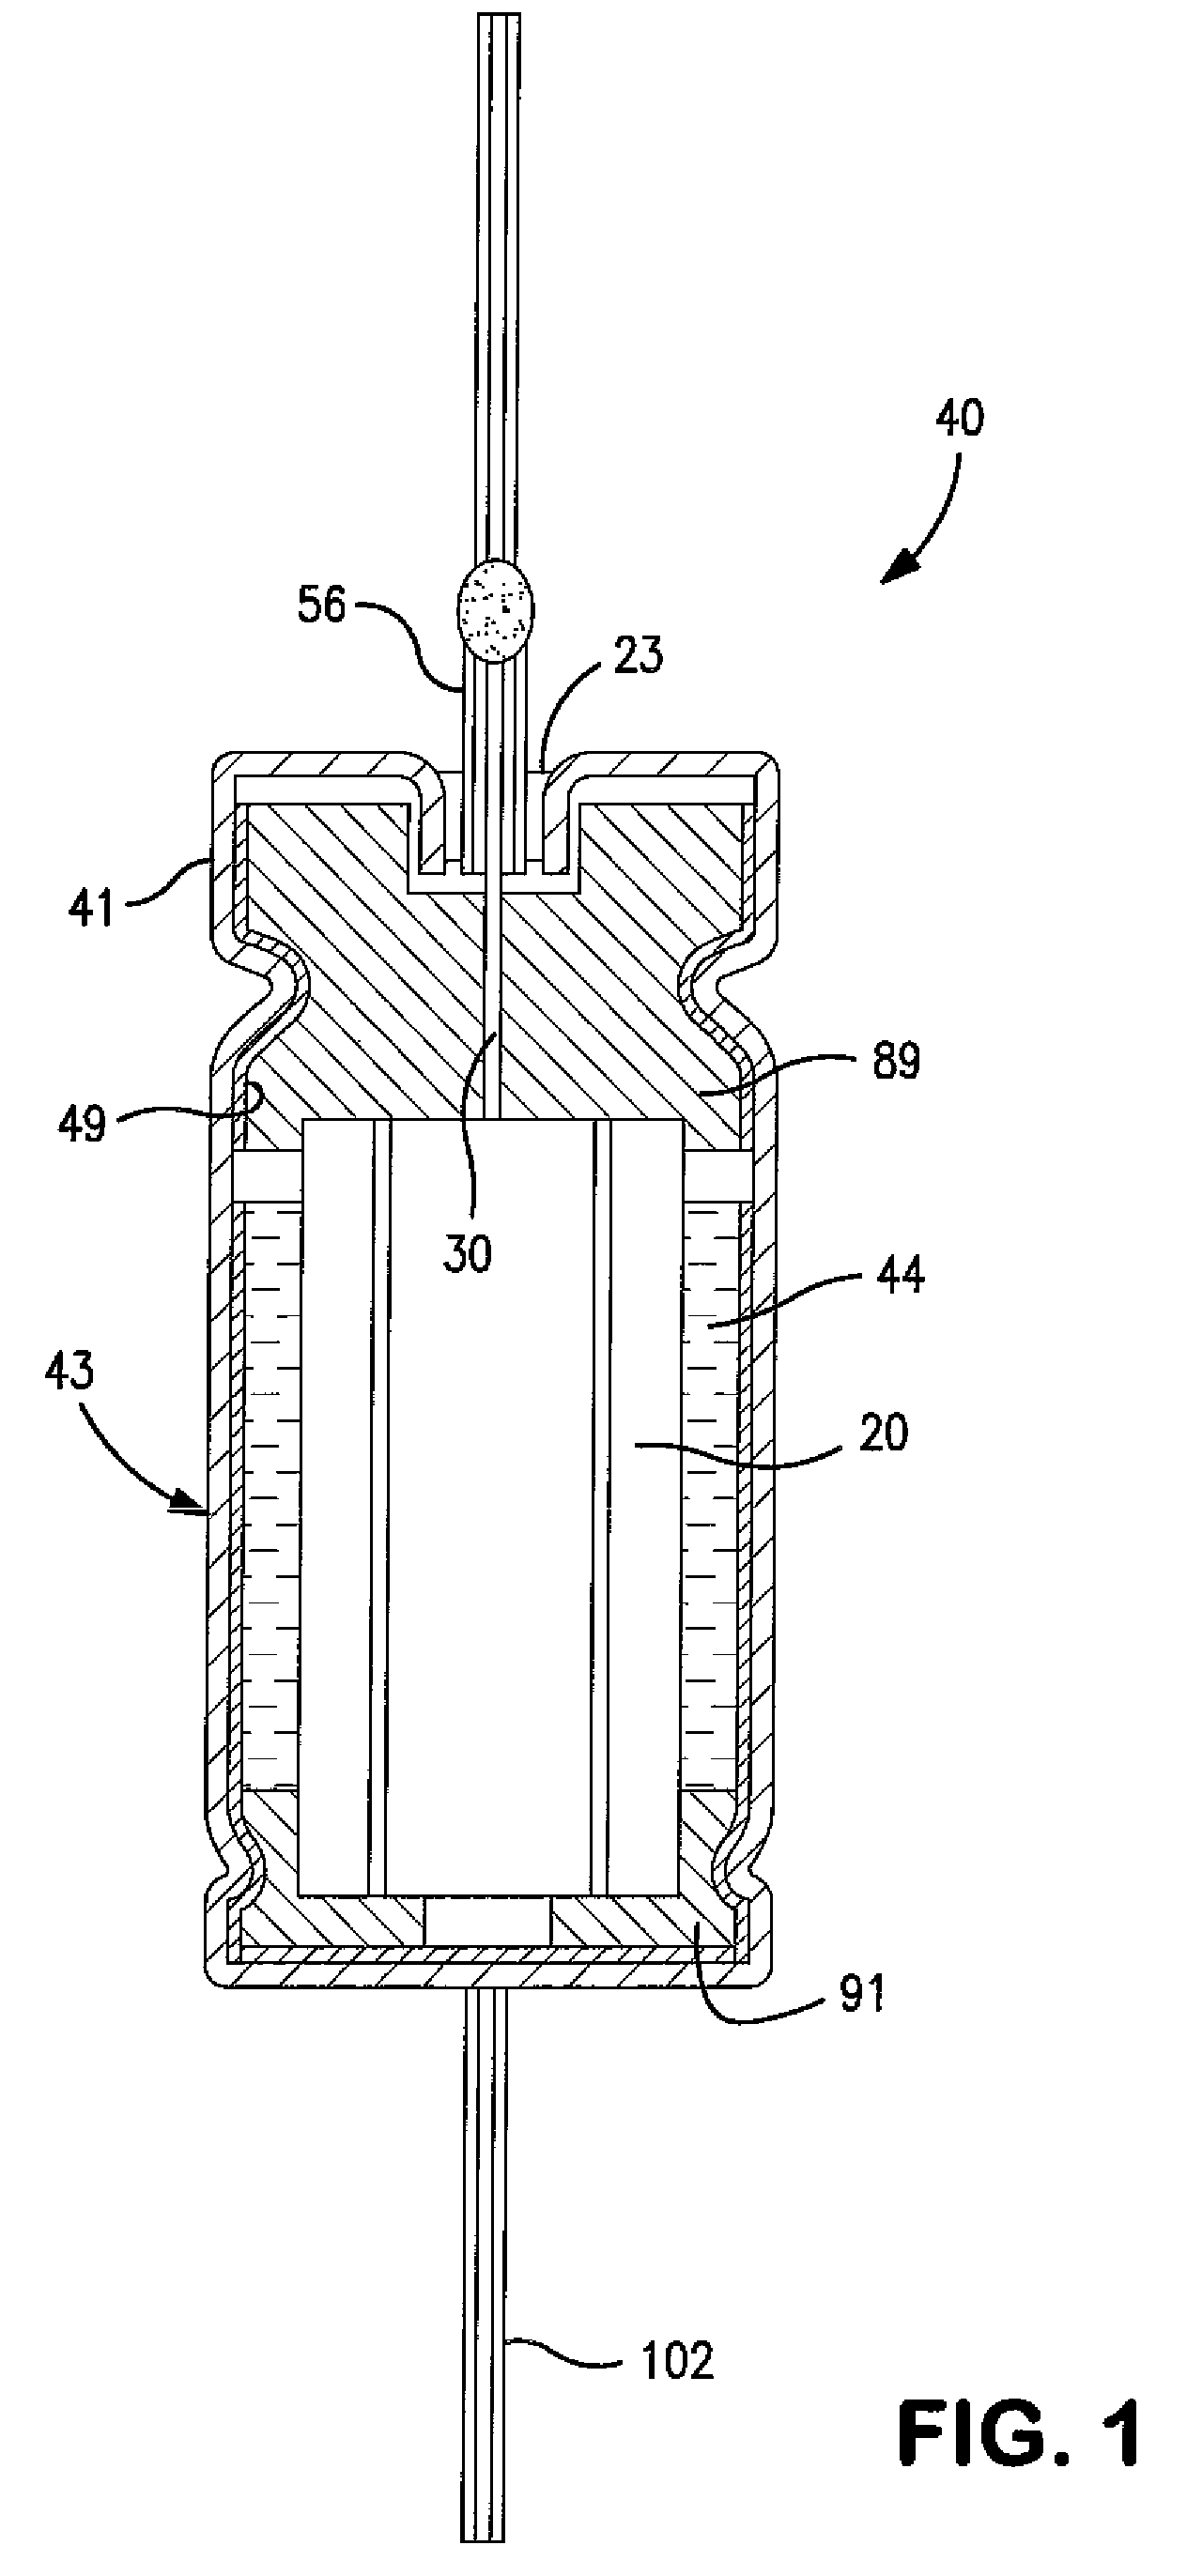 Wet Capacitor Cathode Containing a Conductive Coating Formed Anodic Electrochemical Polymerization of a Microemulsion